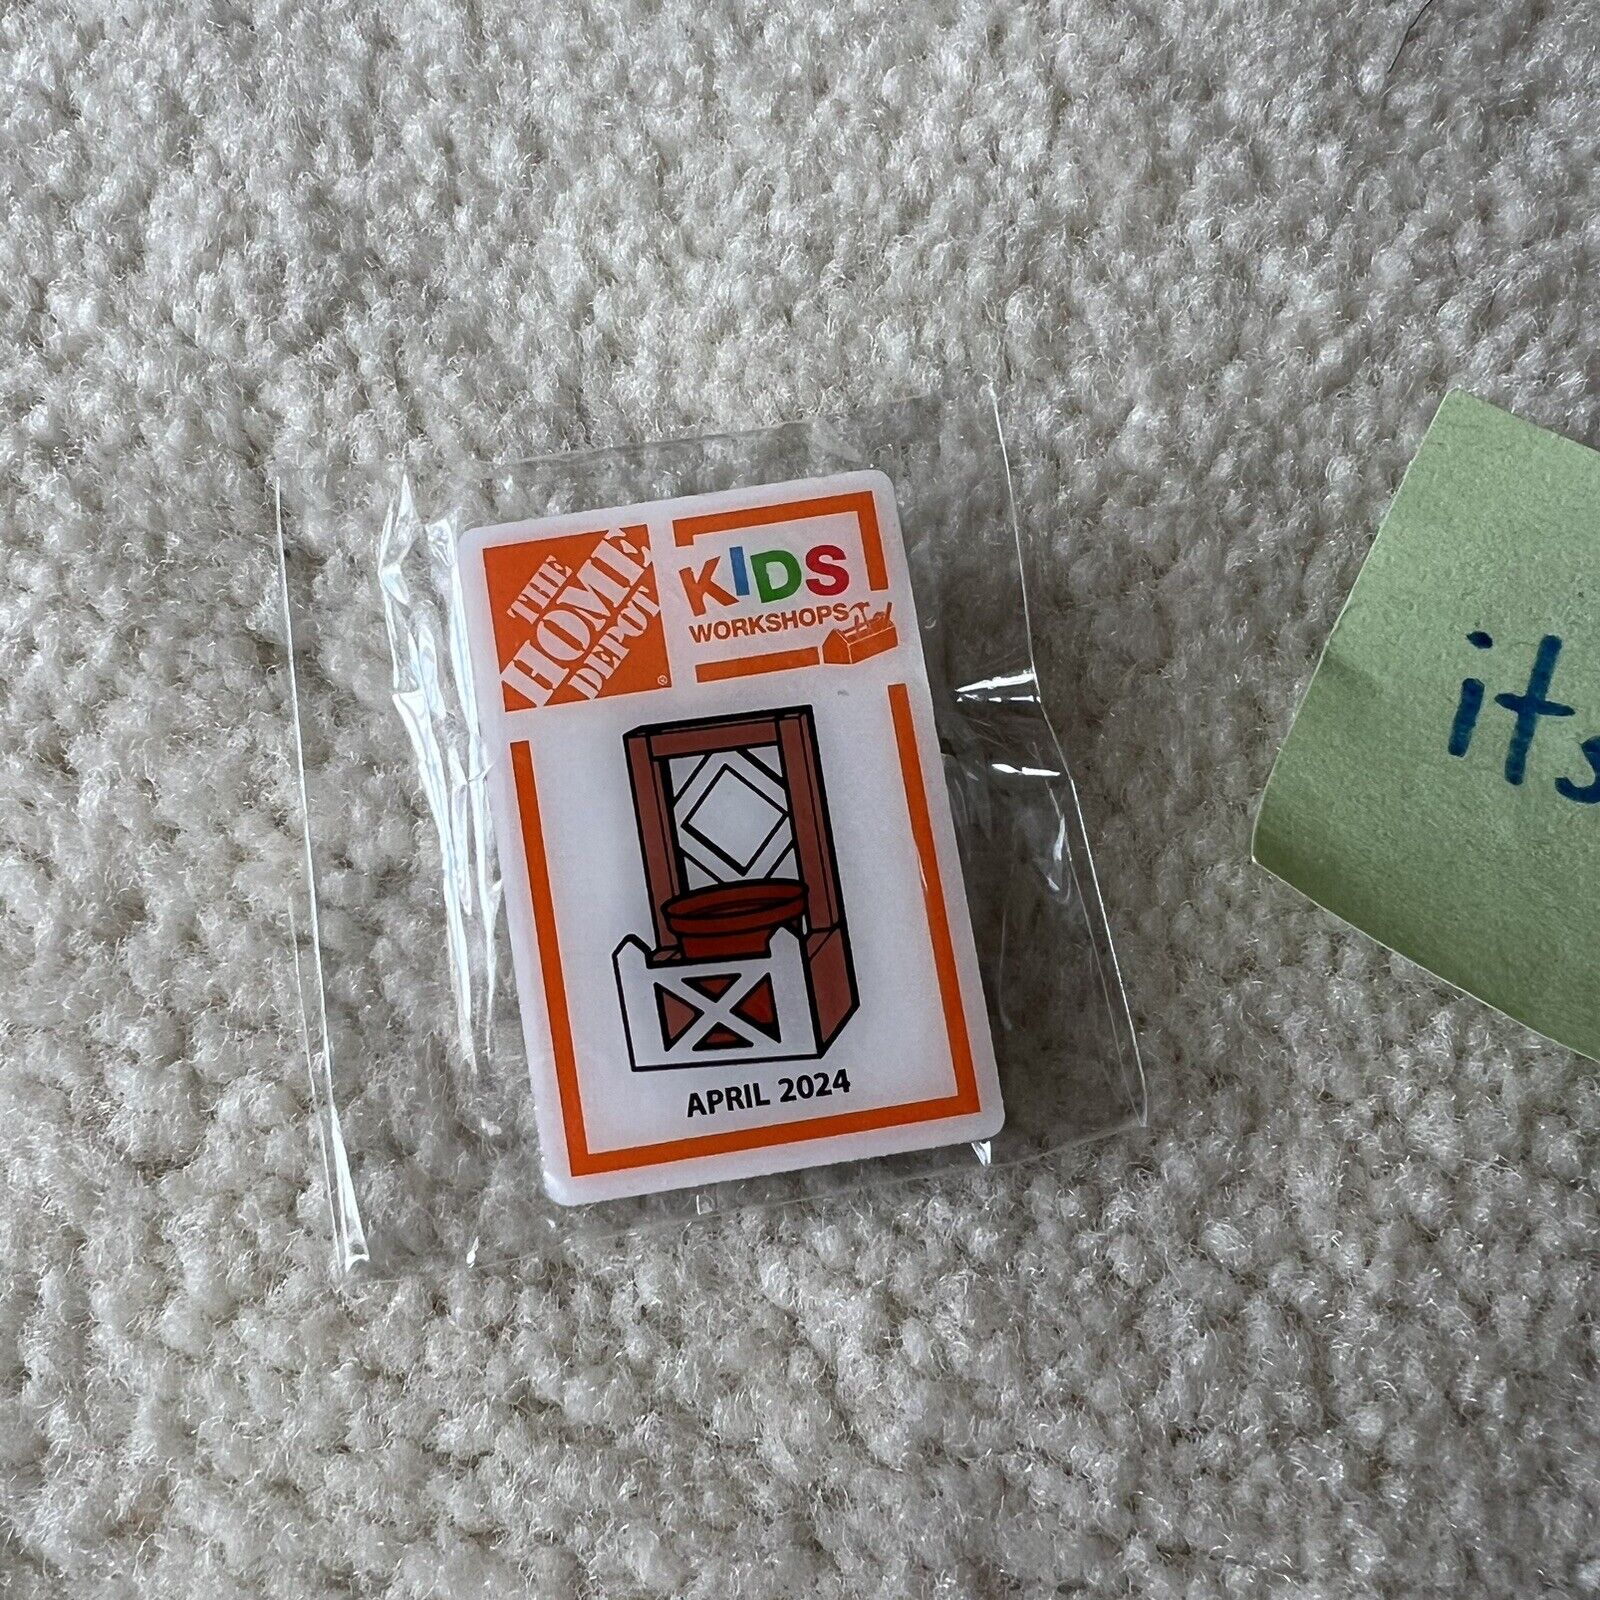 Lattice Planter Collectible Pin from Home Depot Kids Workshop April 2024